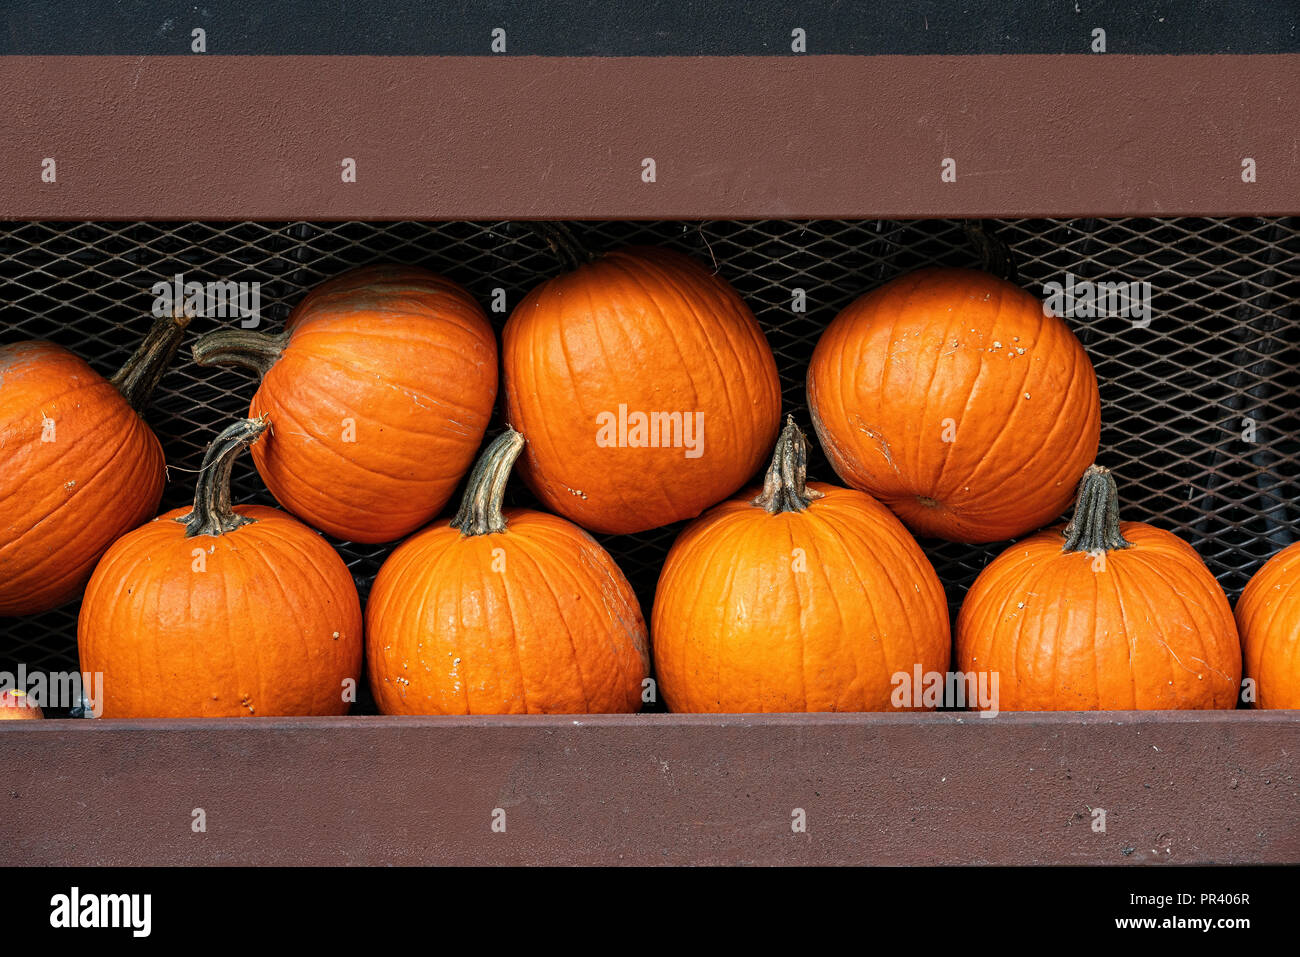 Large Ripe Pumpkins Displayed and Offered for Sale at a New York City Food Market Outdoor Display Stock Photo